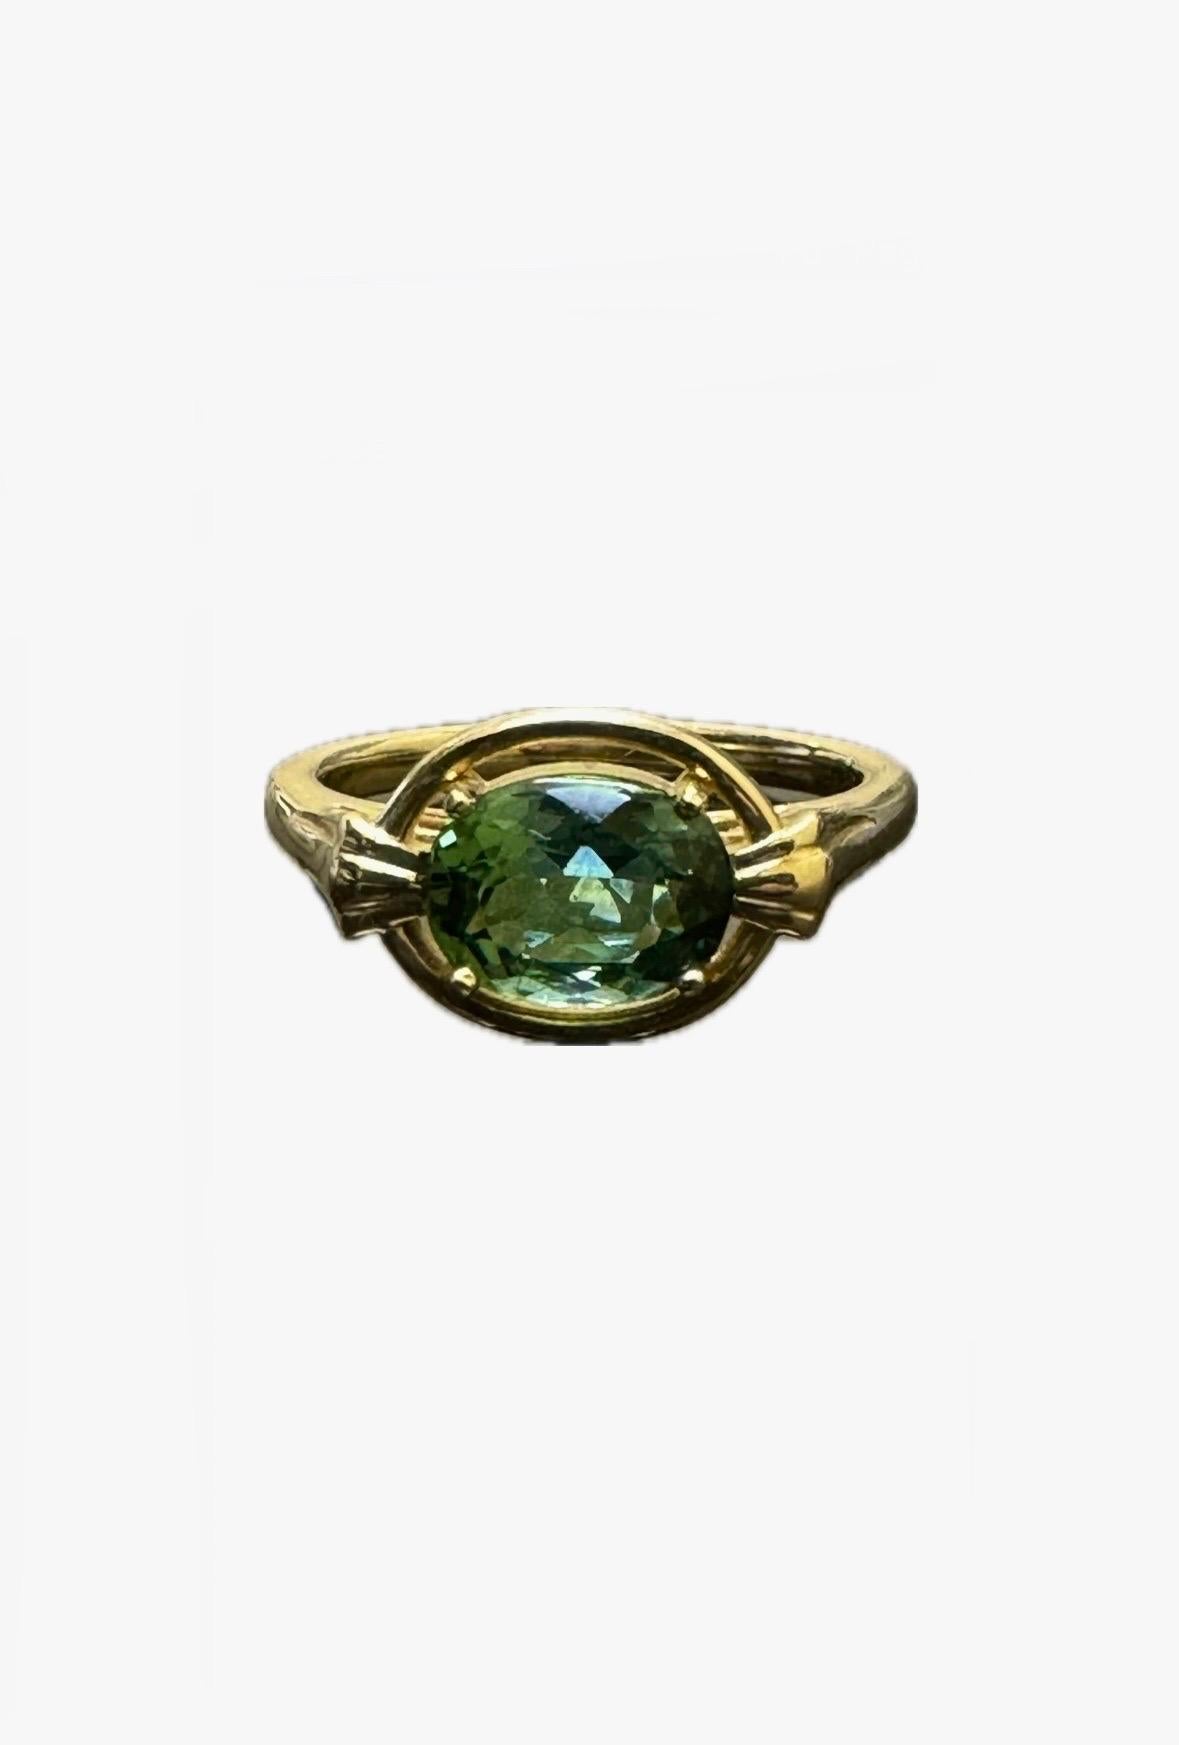 14K Yellow Gold 1.38 Carat Oval Blue Green Tourmaline Engagement Ring  For Sale 4